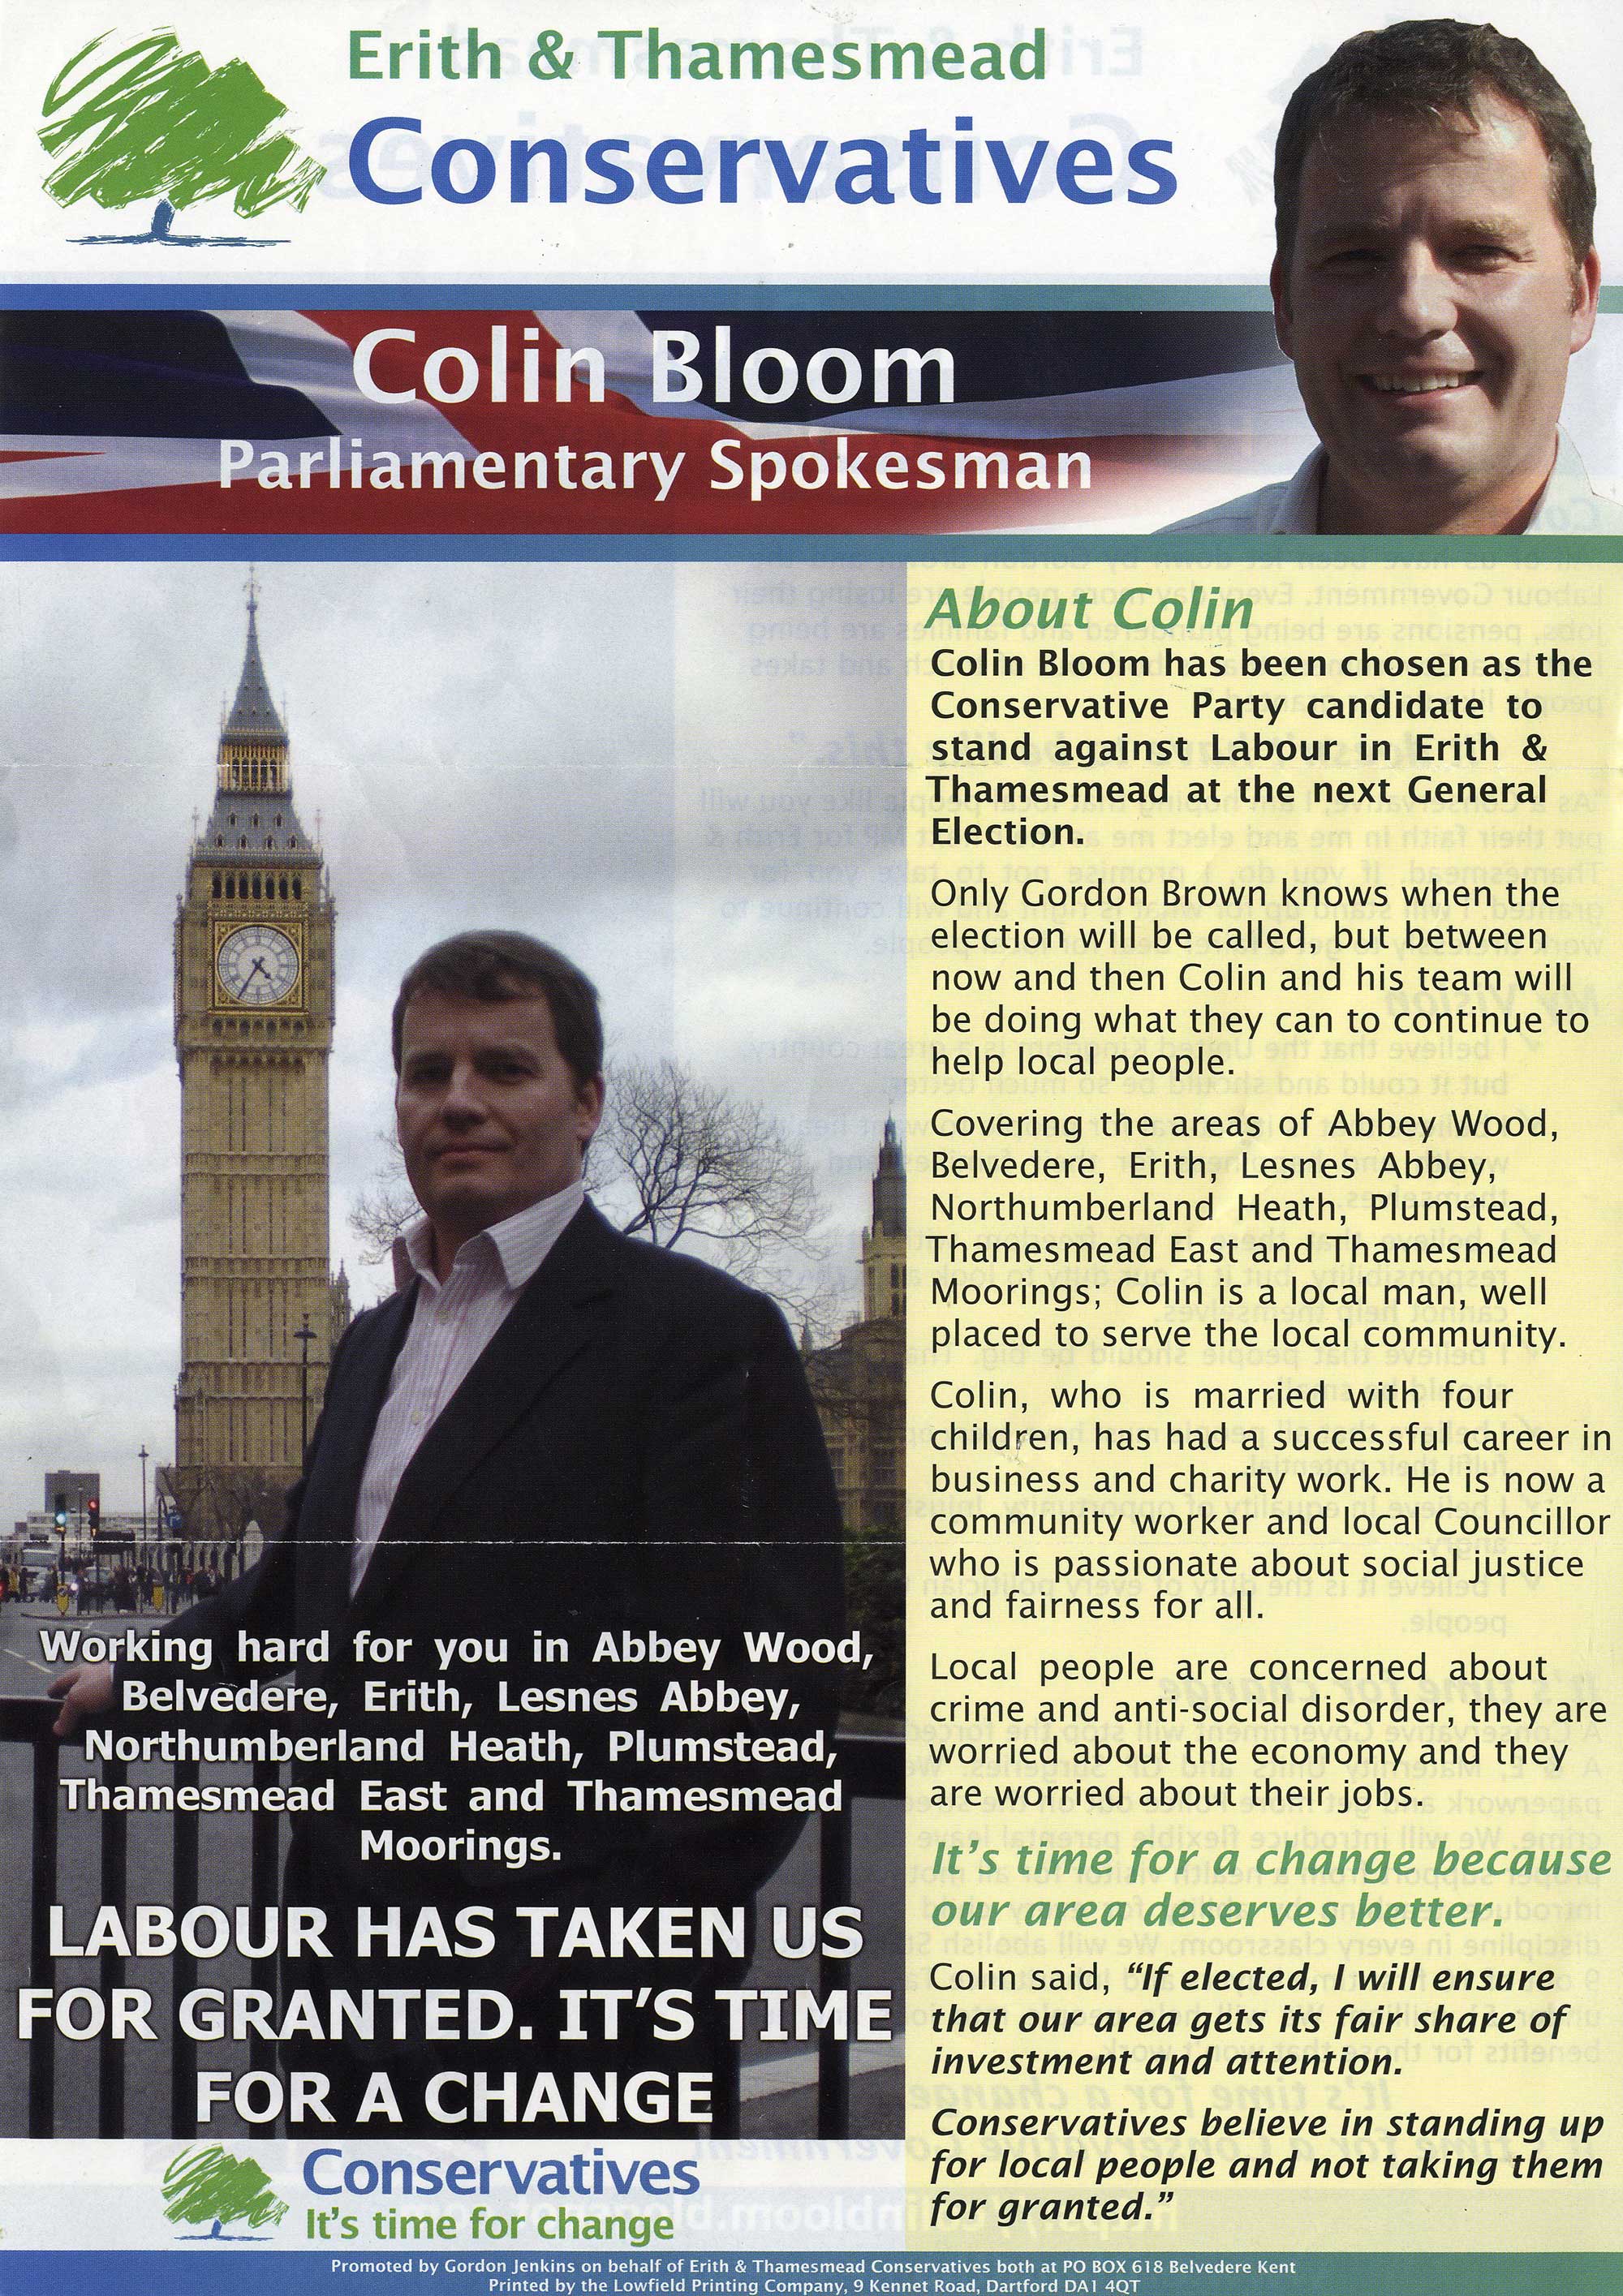 Colin Bloom's election paper